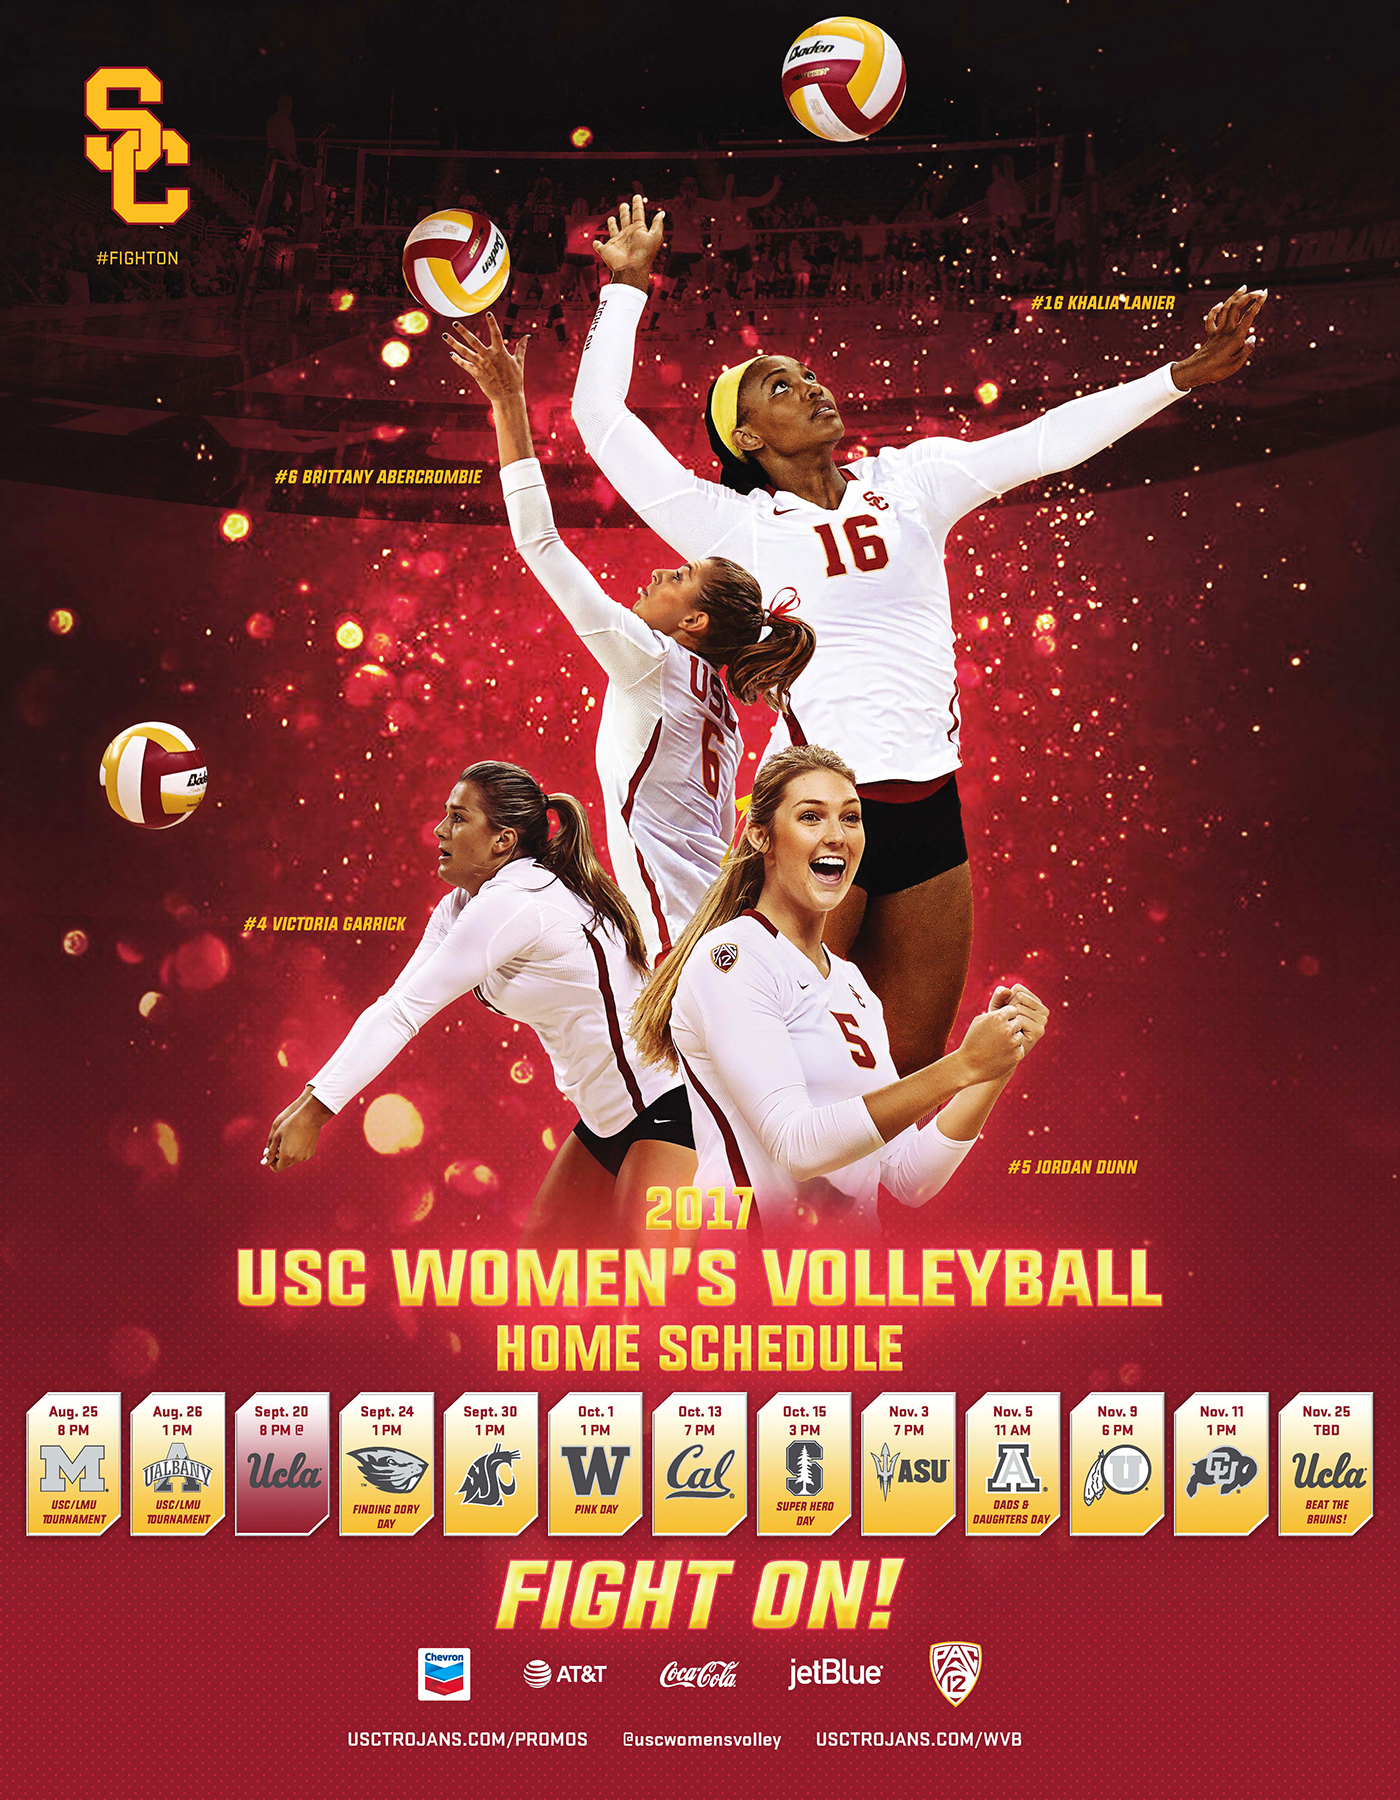 Home Schedule Poster for the 2017 USC Women's Volleyball team.